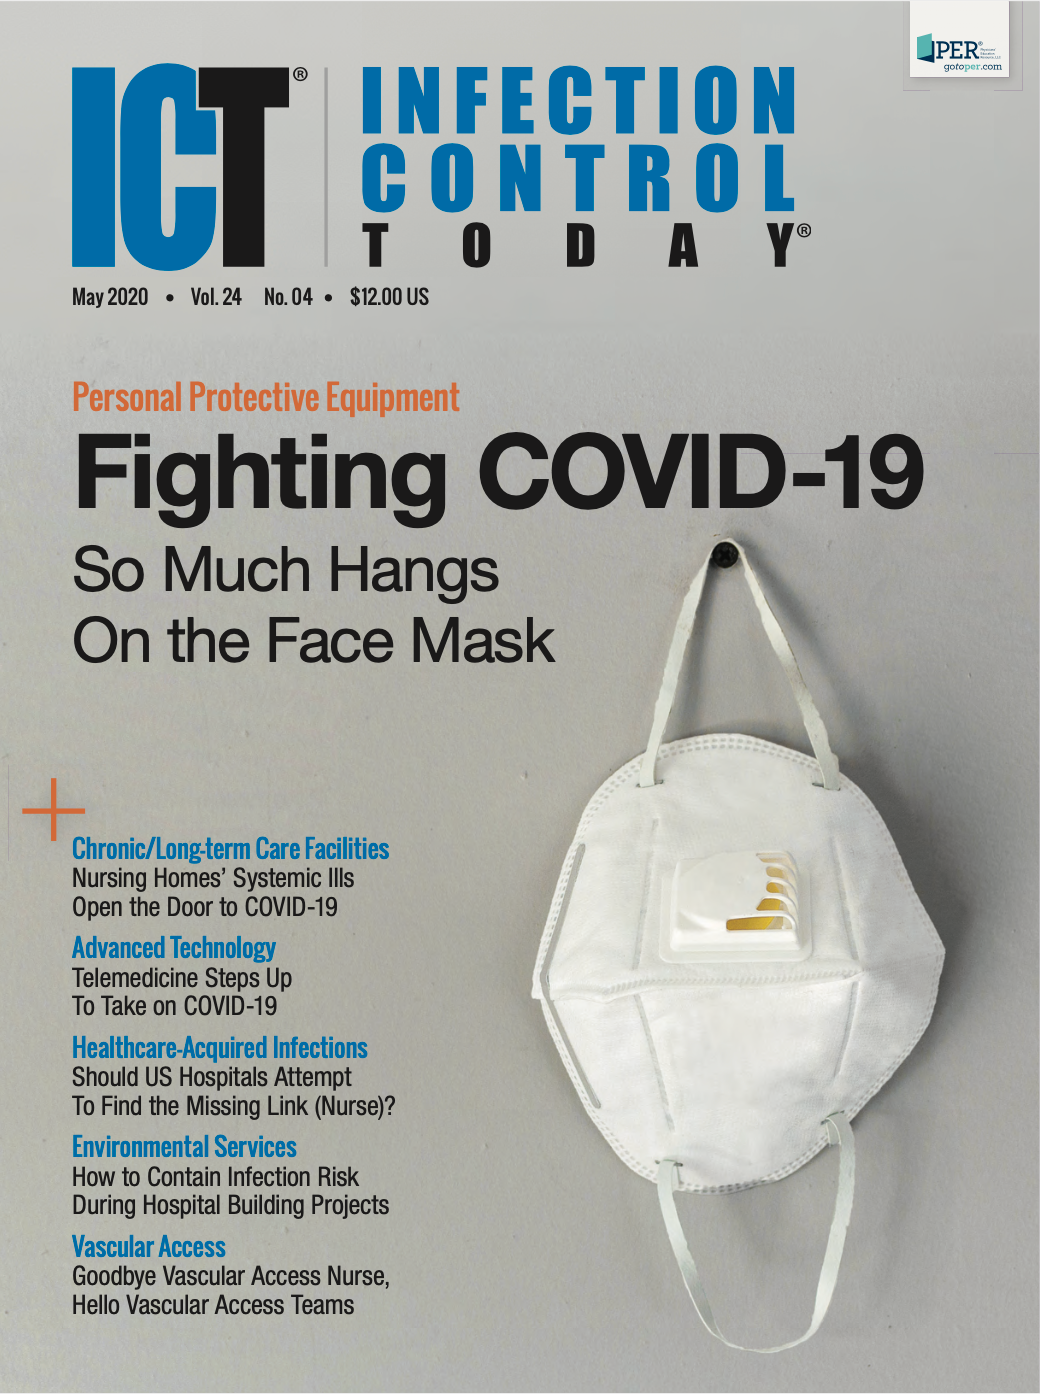 Infection Control Today, May 2020 (Vol. 24 No. 4)